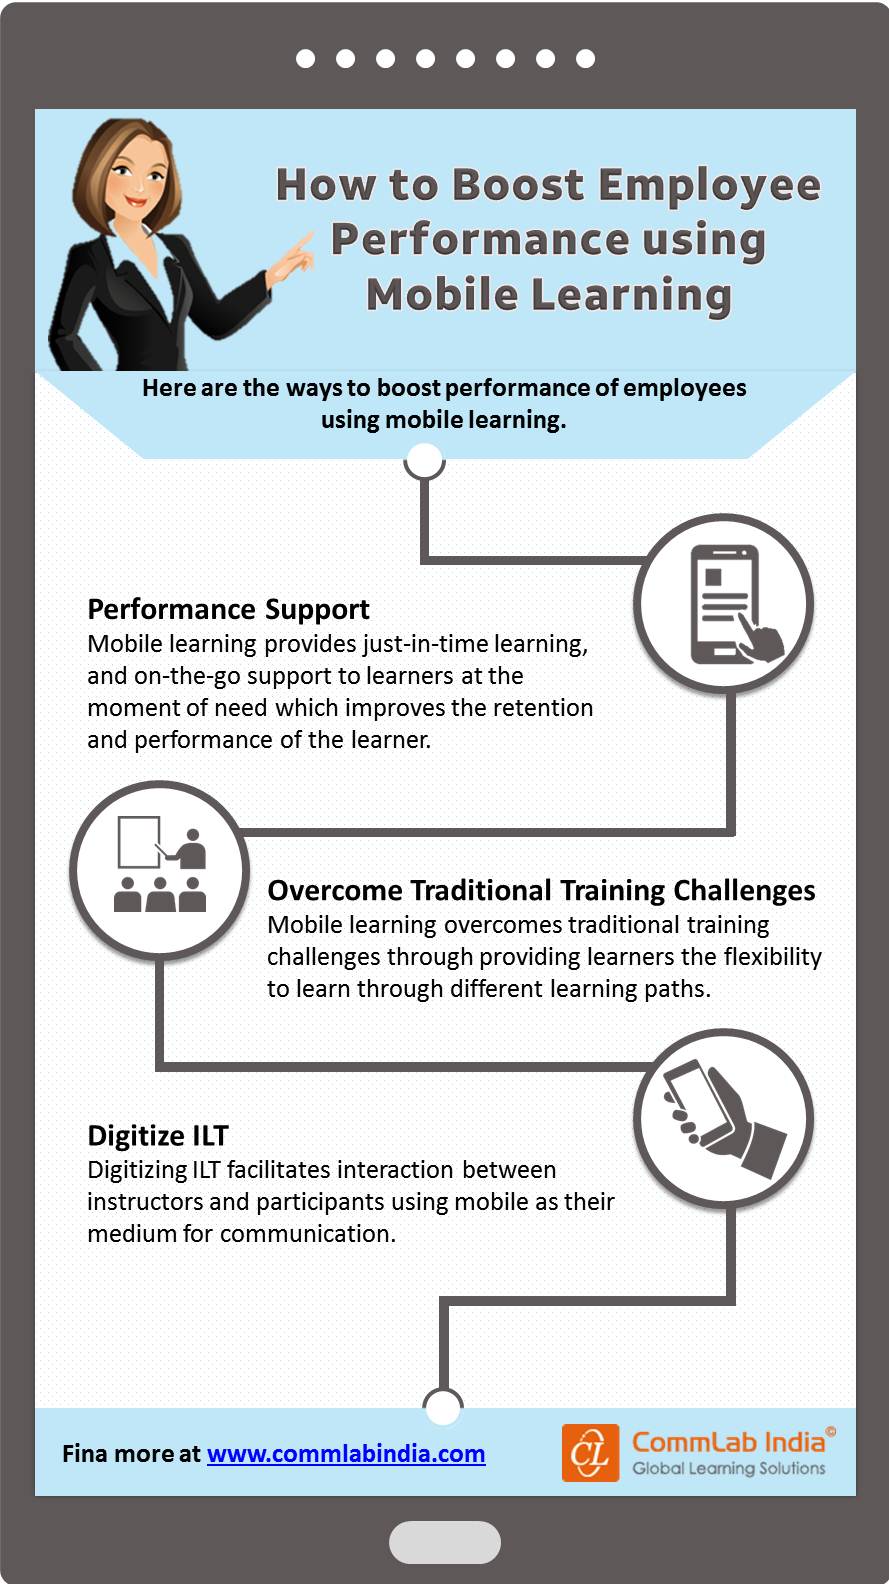 How to Boost Employee Performance Using Mobile Learning [Infographic]